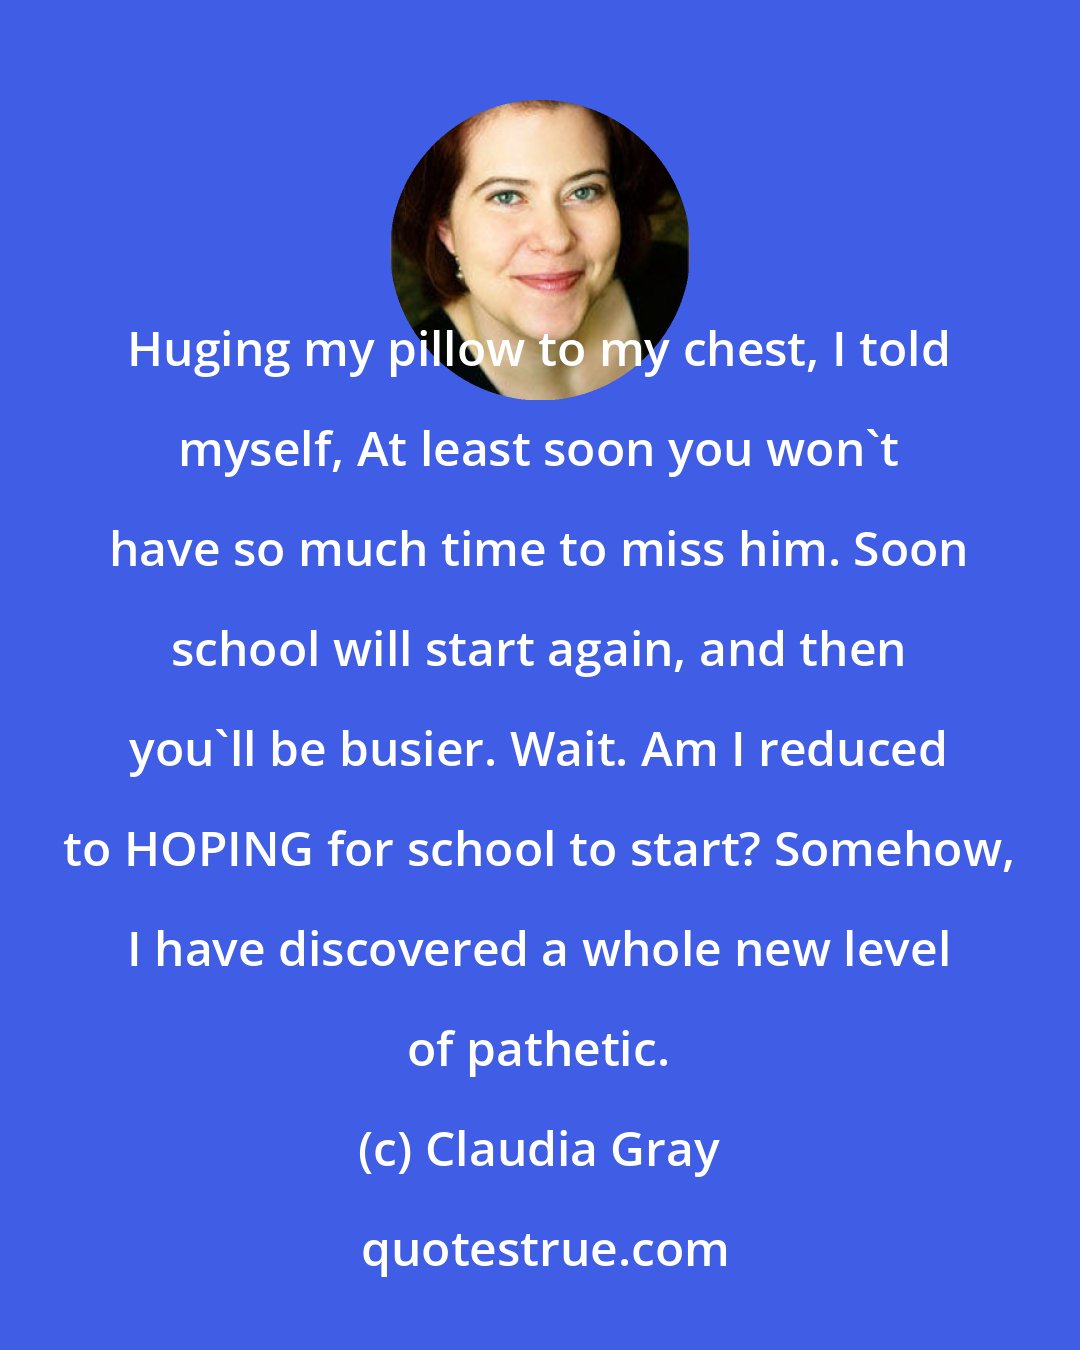 Claudia Gray: Huging my pillow to my chest, I told myself, At least soon you won't have so much time to miss him. Soon school will start again, and then you'll be busier. Wait. Am I reduced to HOPING for school to start? Somehow, I have discovered a whole new level of pathetic.